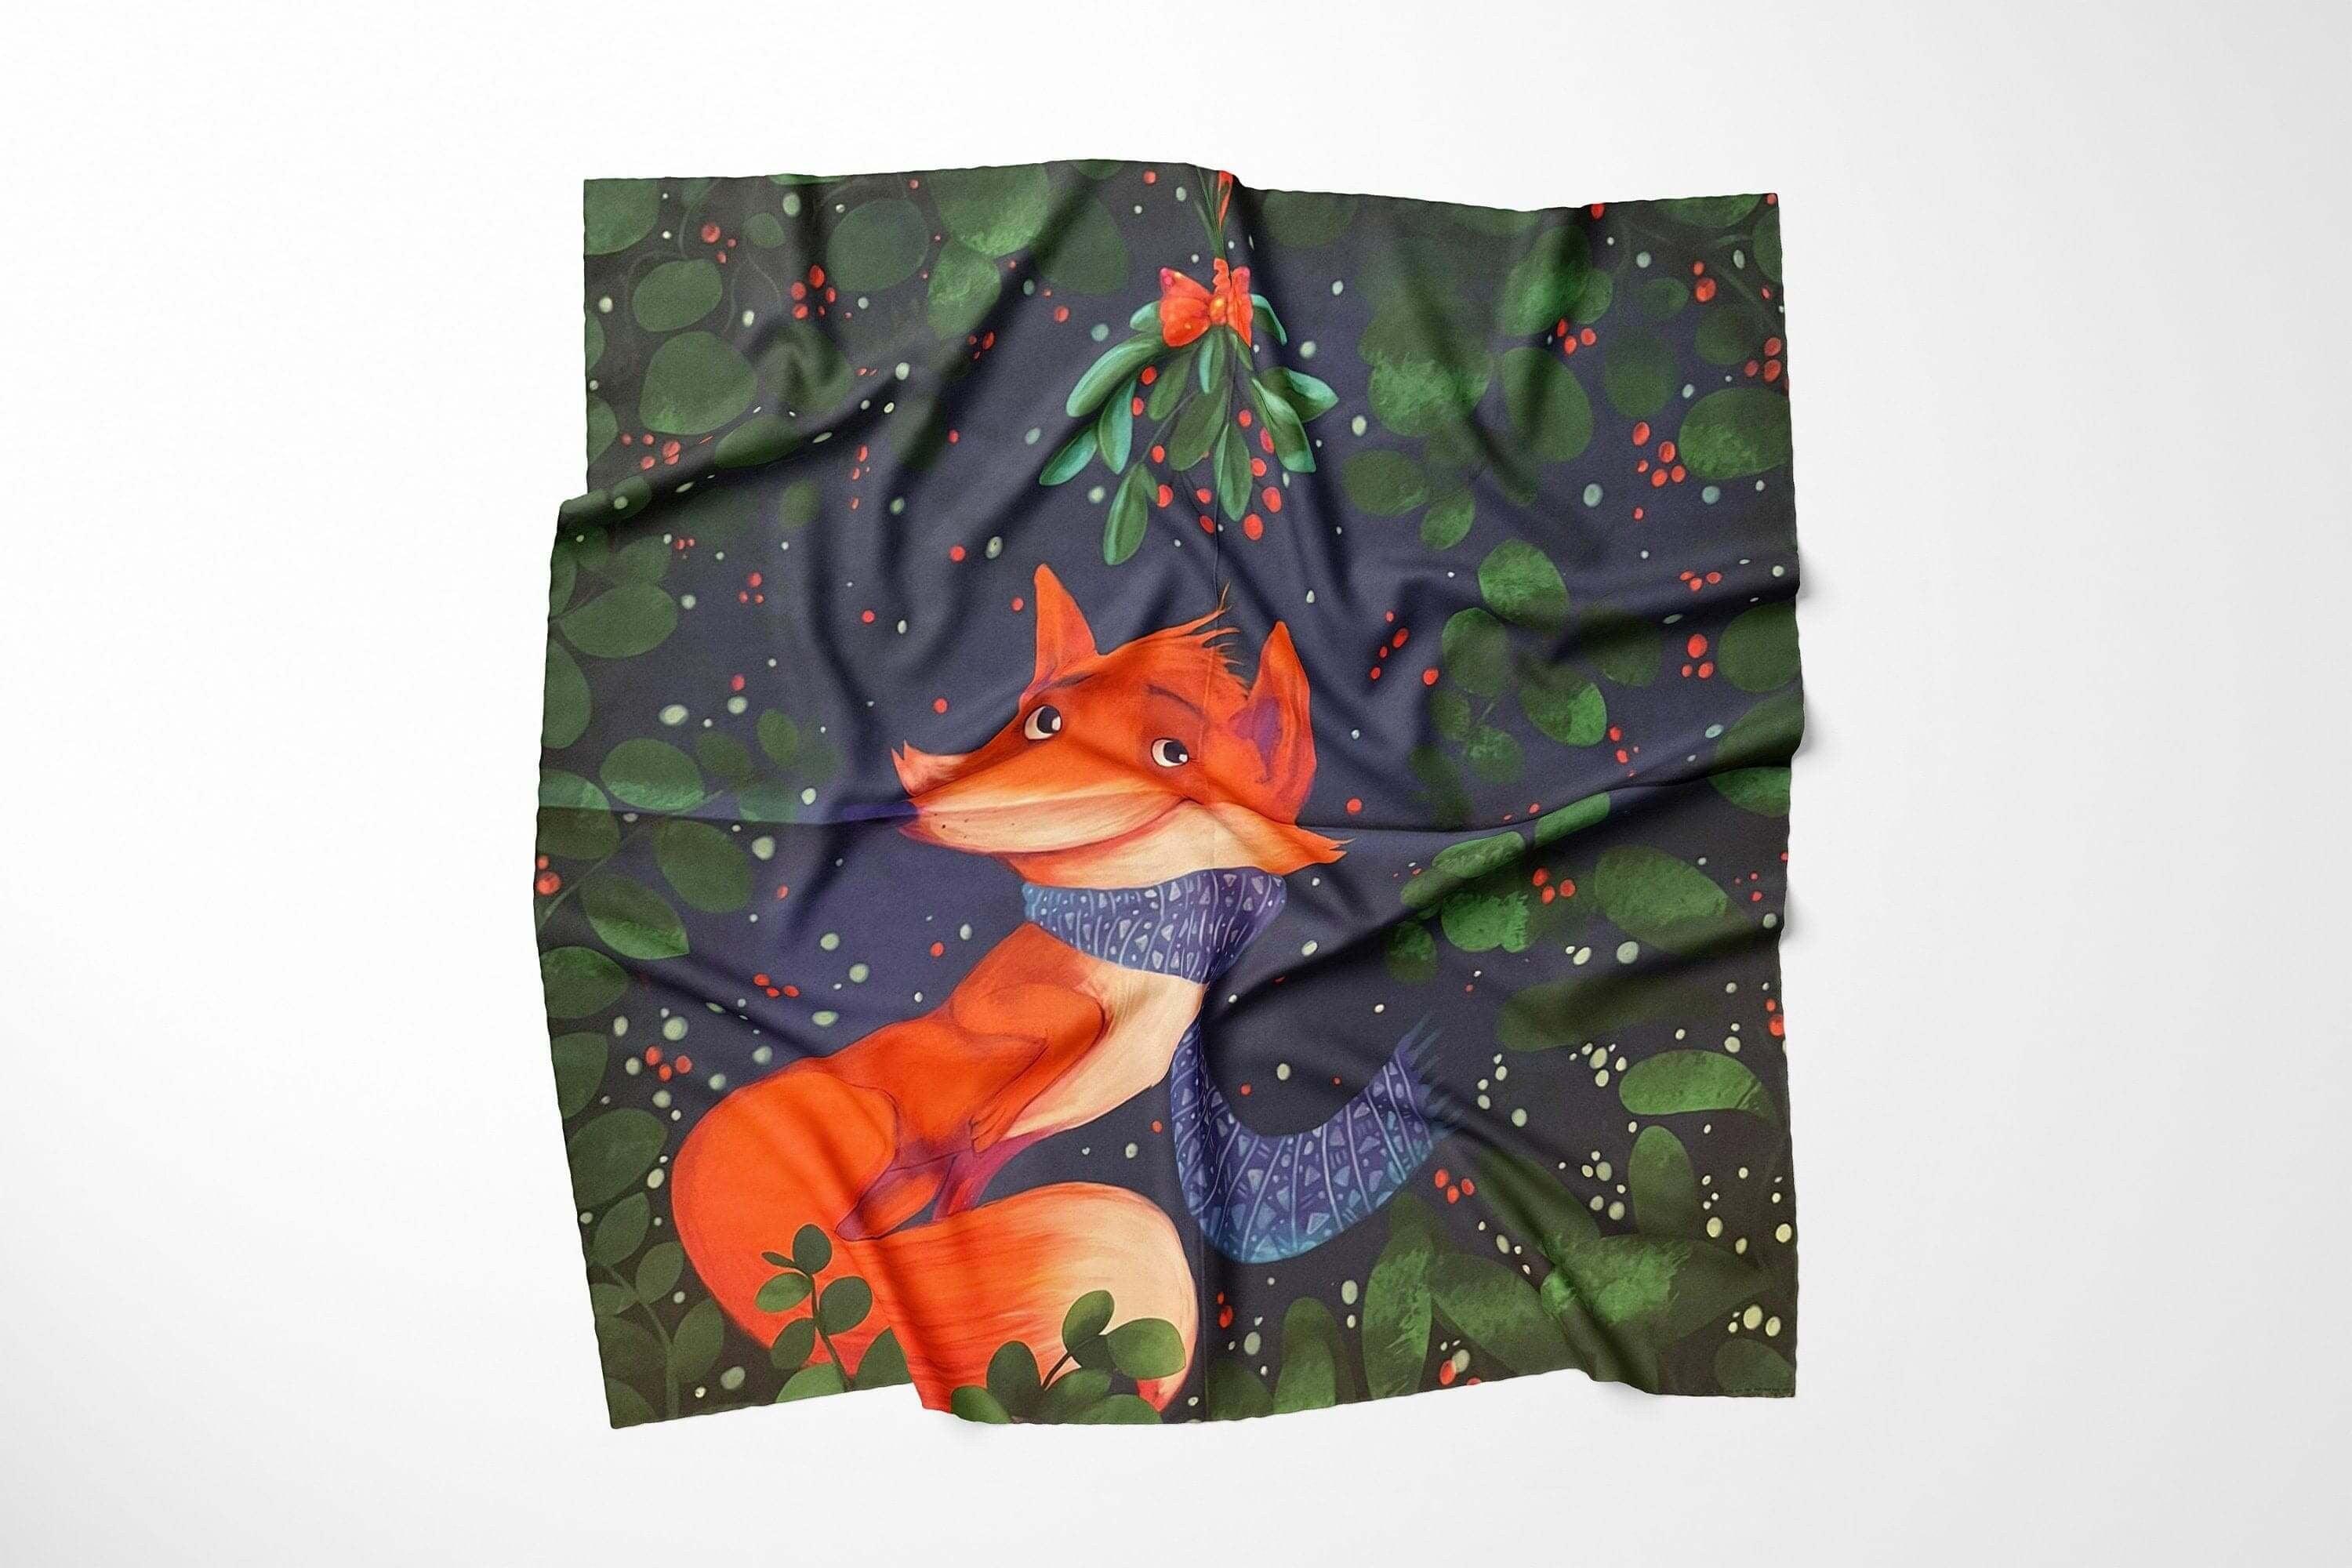 Unique Animal Pattern Satin Scarf, Best Gift for Women, Fox Pattern Head Scarf, Dark Blue Green Orange Neck Scarf, Special Design Hair Scarf available at Moyoni Design